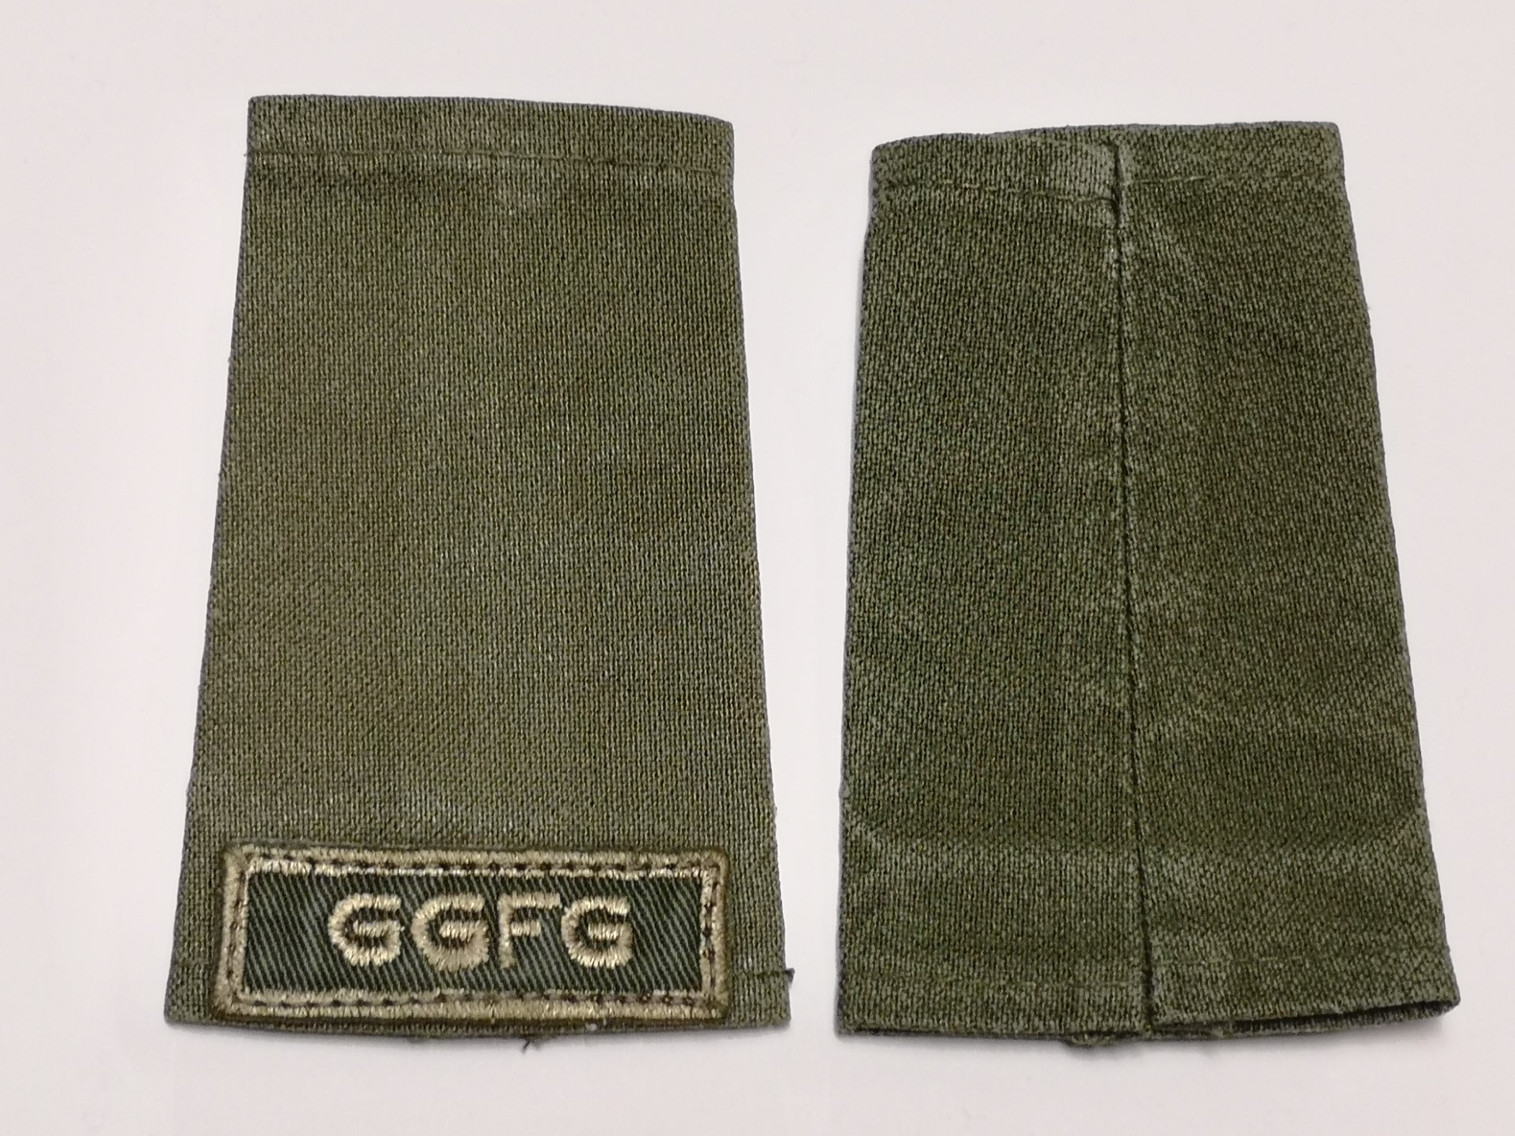 Canadian Armed Forces Green Rank Epaulets GGFG - Private (Basic)